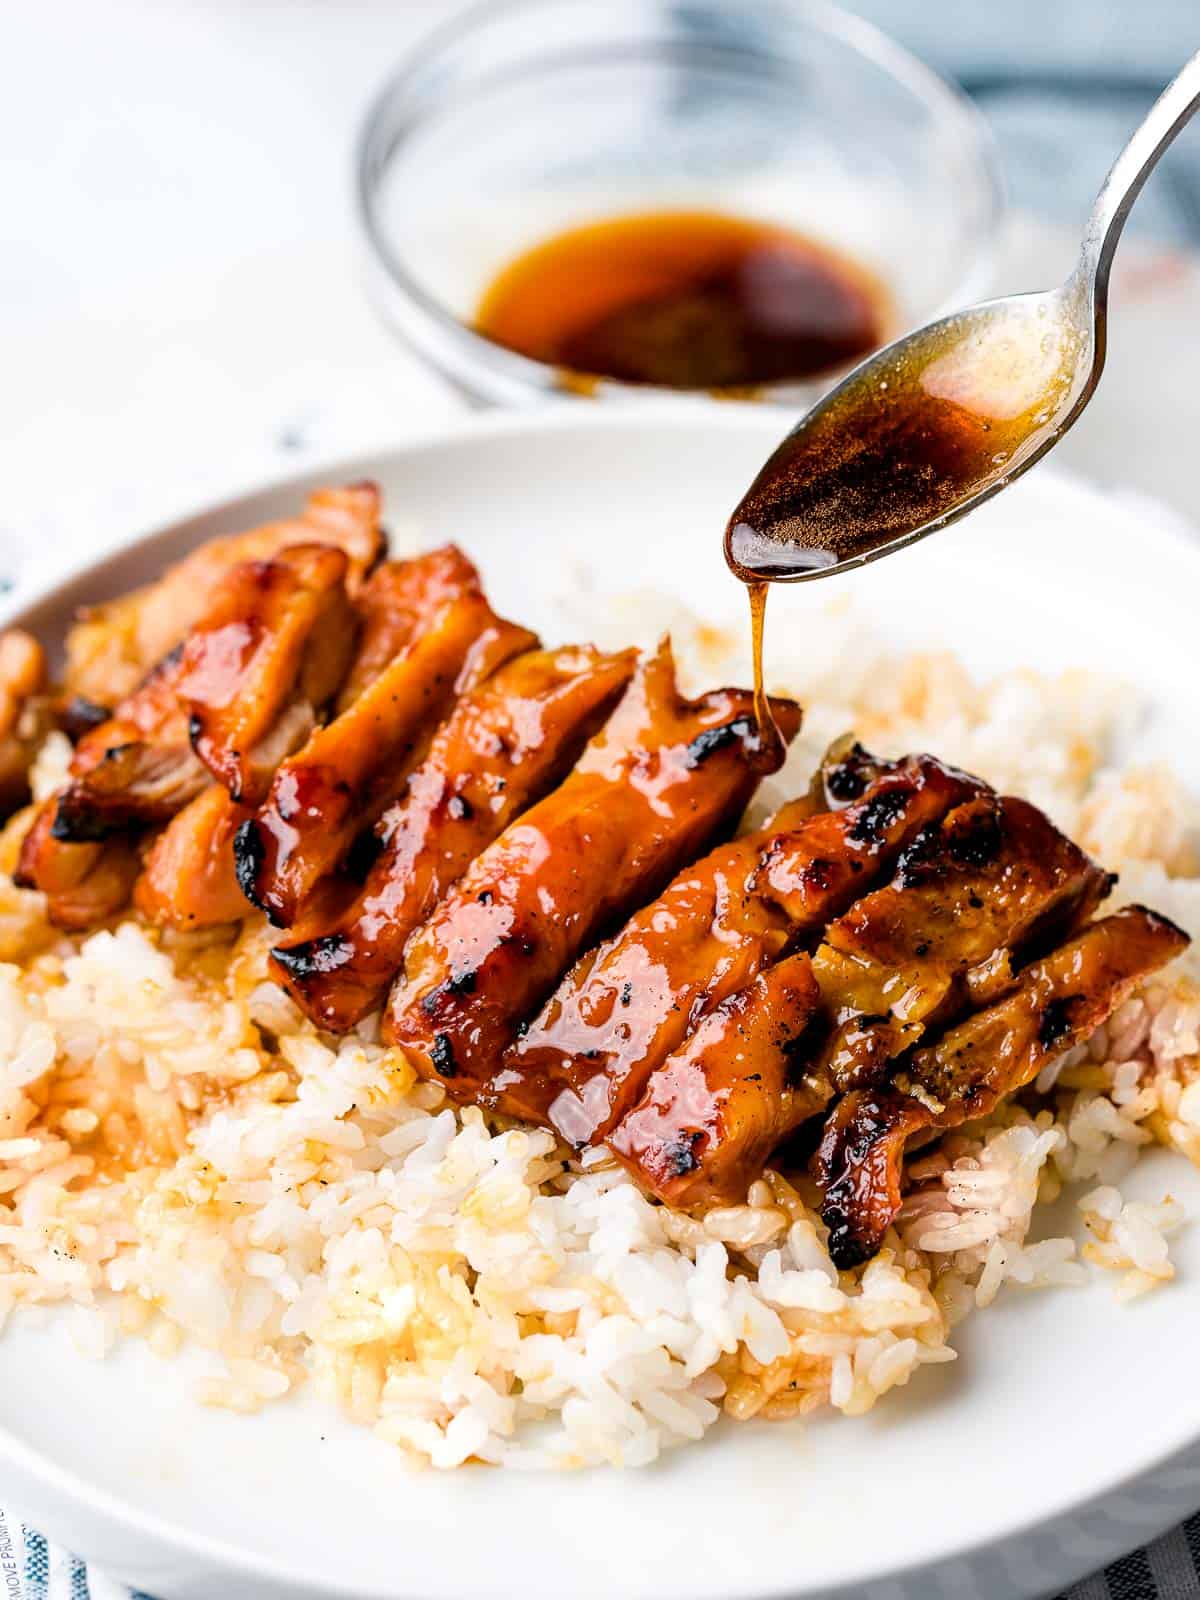 Chicken teriyaki being glazed with sauce with steamed rice.